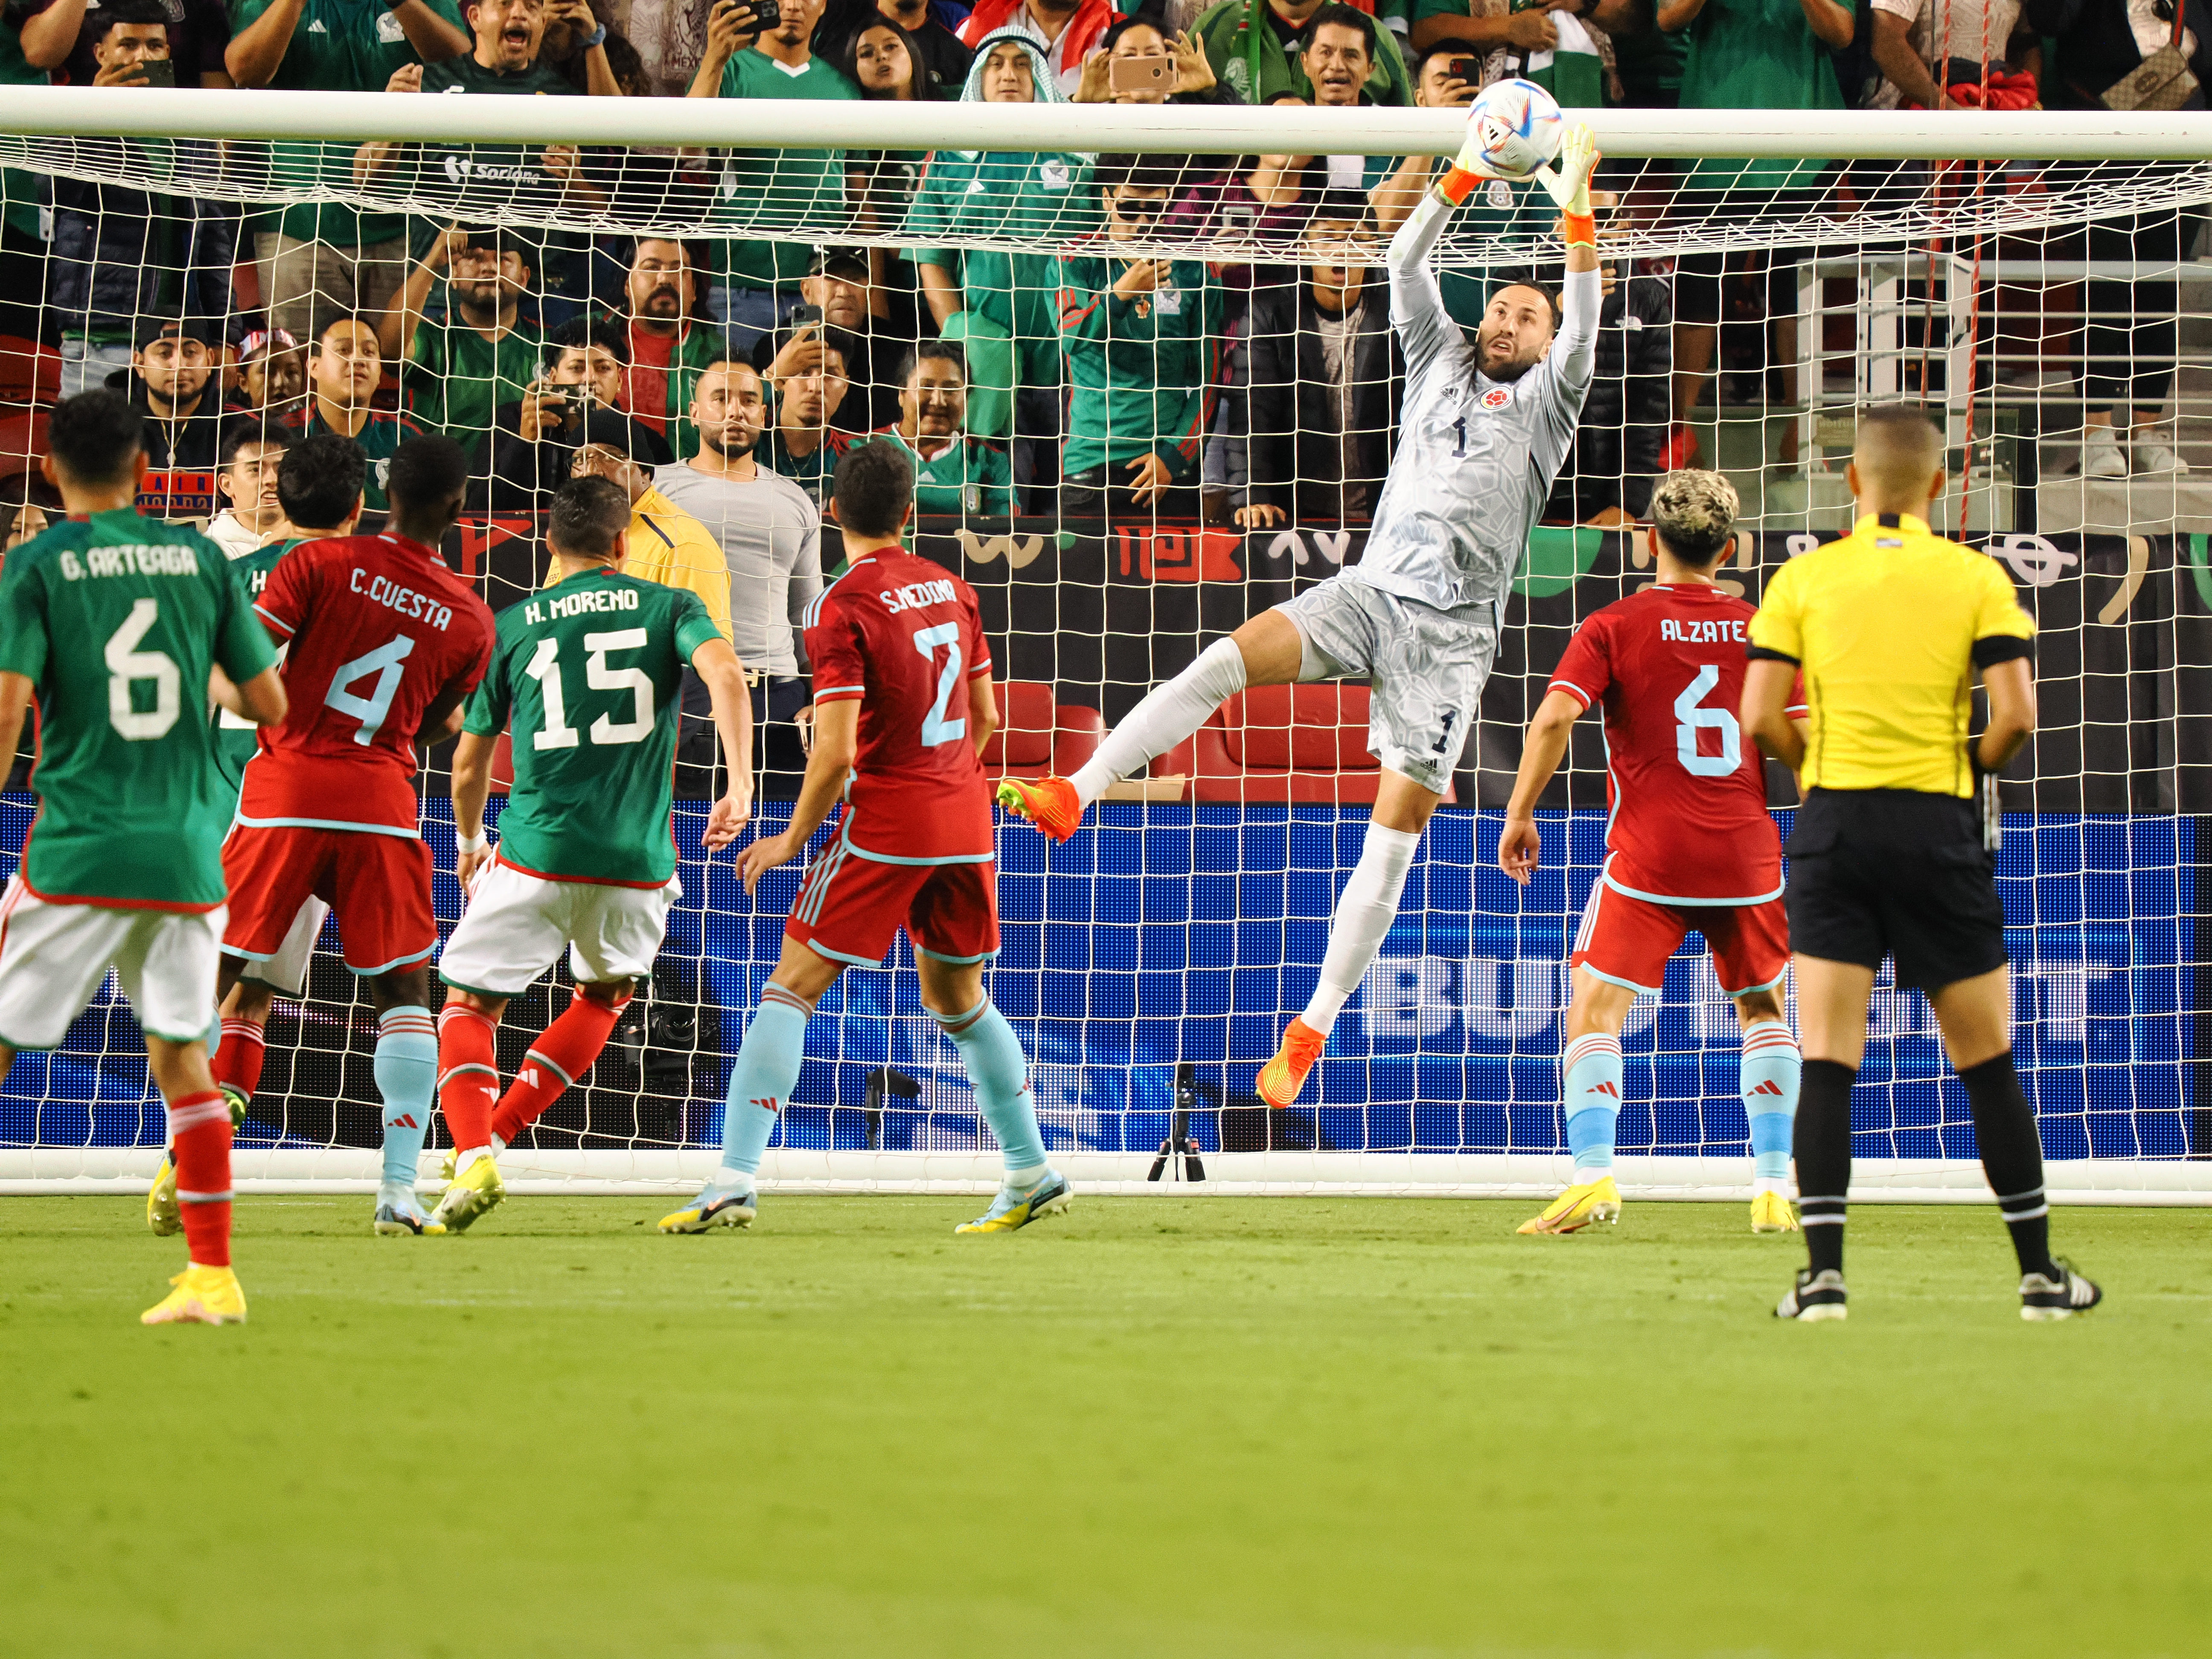 Copa Libertadores: Mexico beats Paraguay 2-0 (3) - People's Daily Online